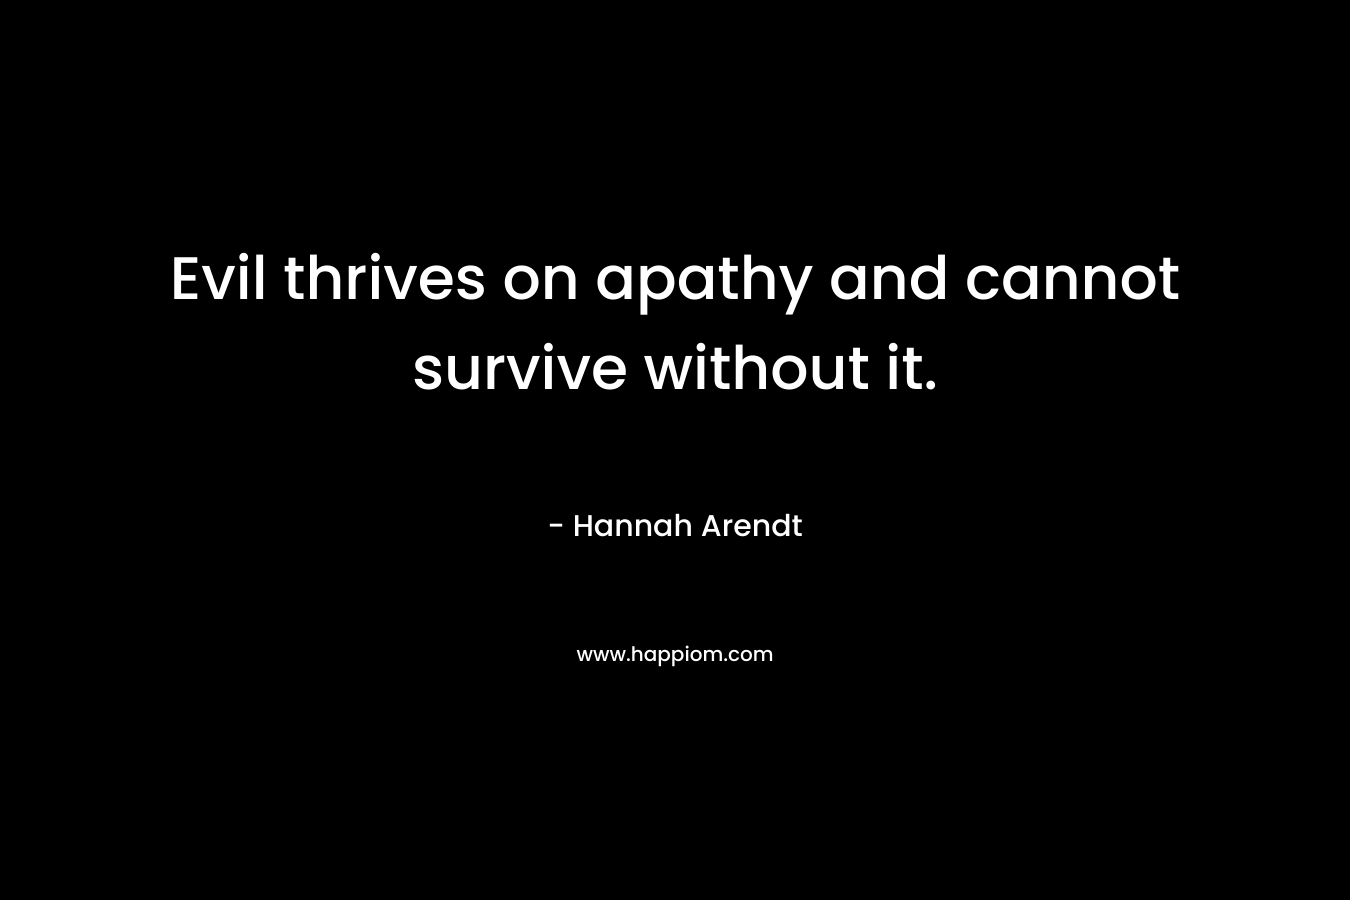 Evil thrives on apathy and cannot survive without it. – Hannah Arendt